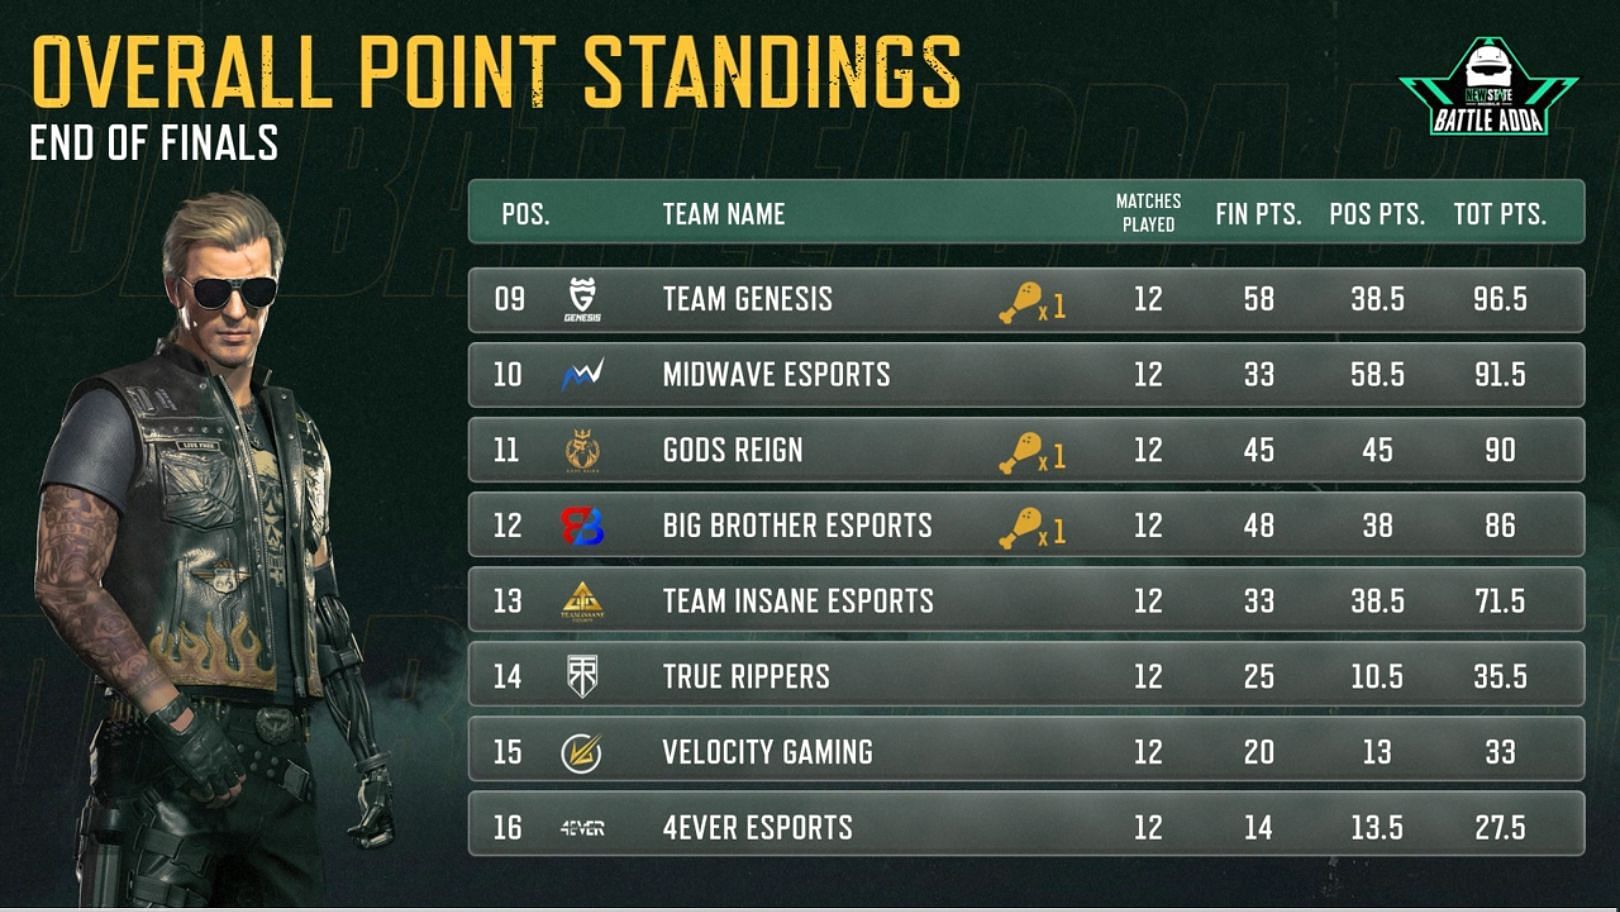 Overall standings of PUBG New State Battle Adda Finals (Image via Krafton)